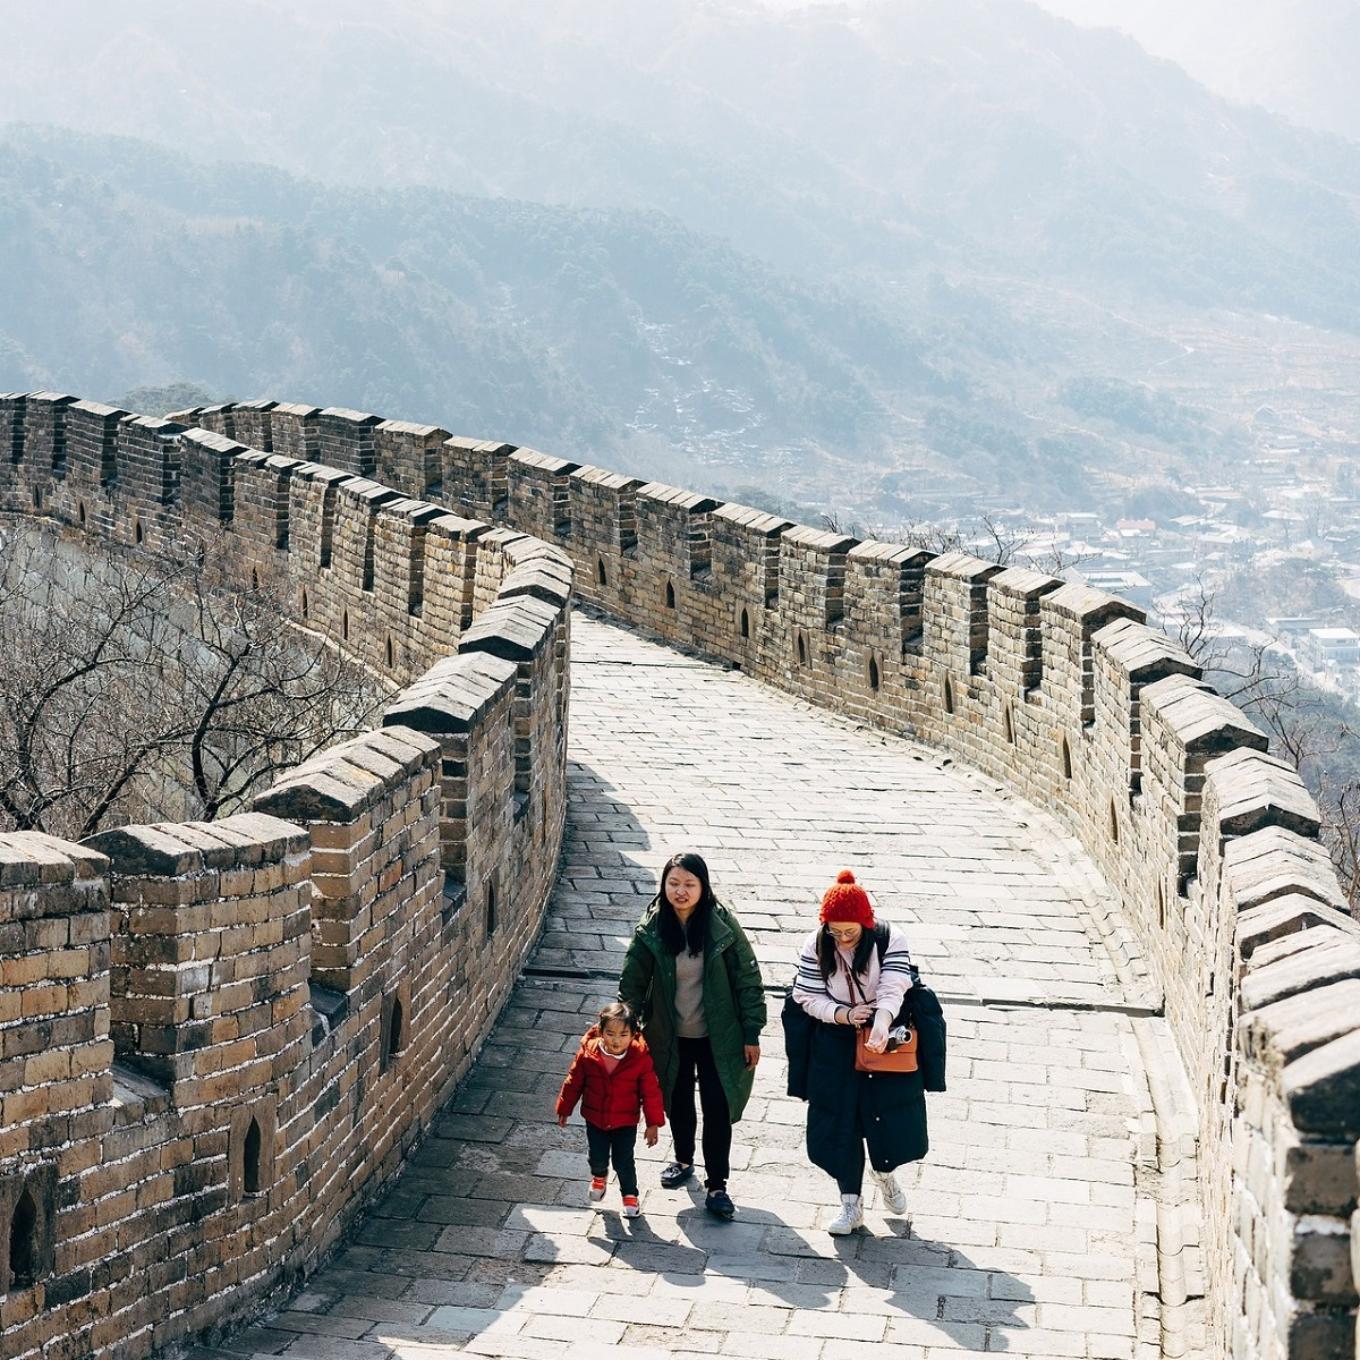 People walking along the Great wall of China